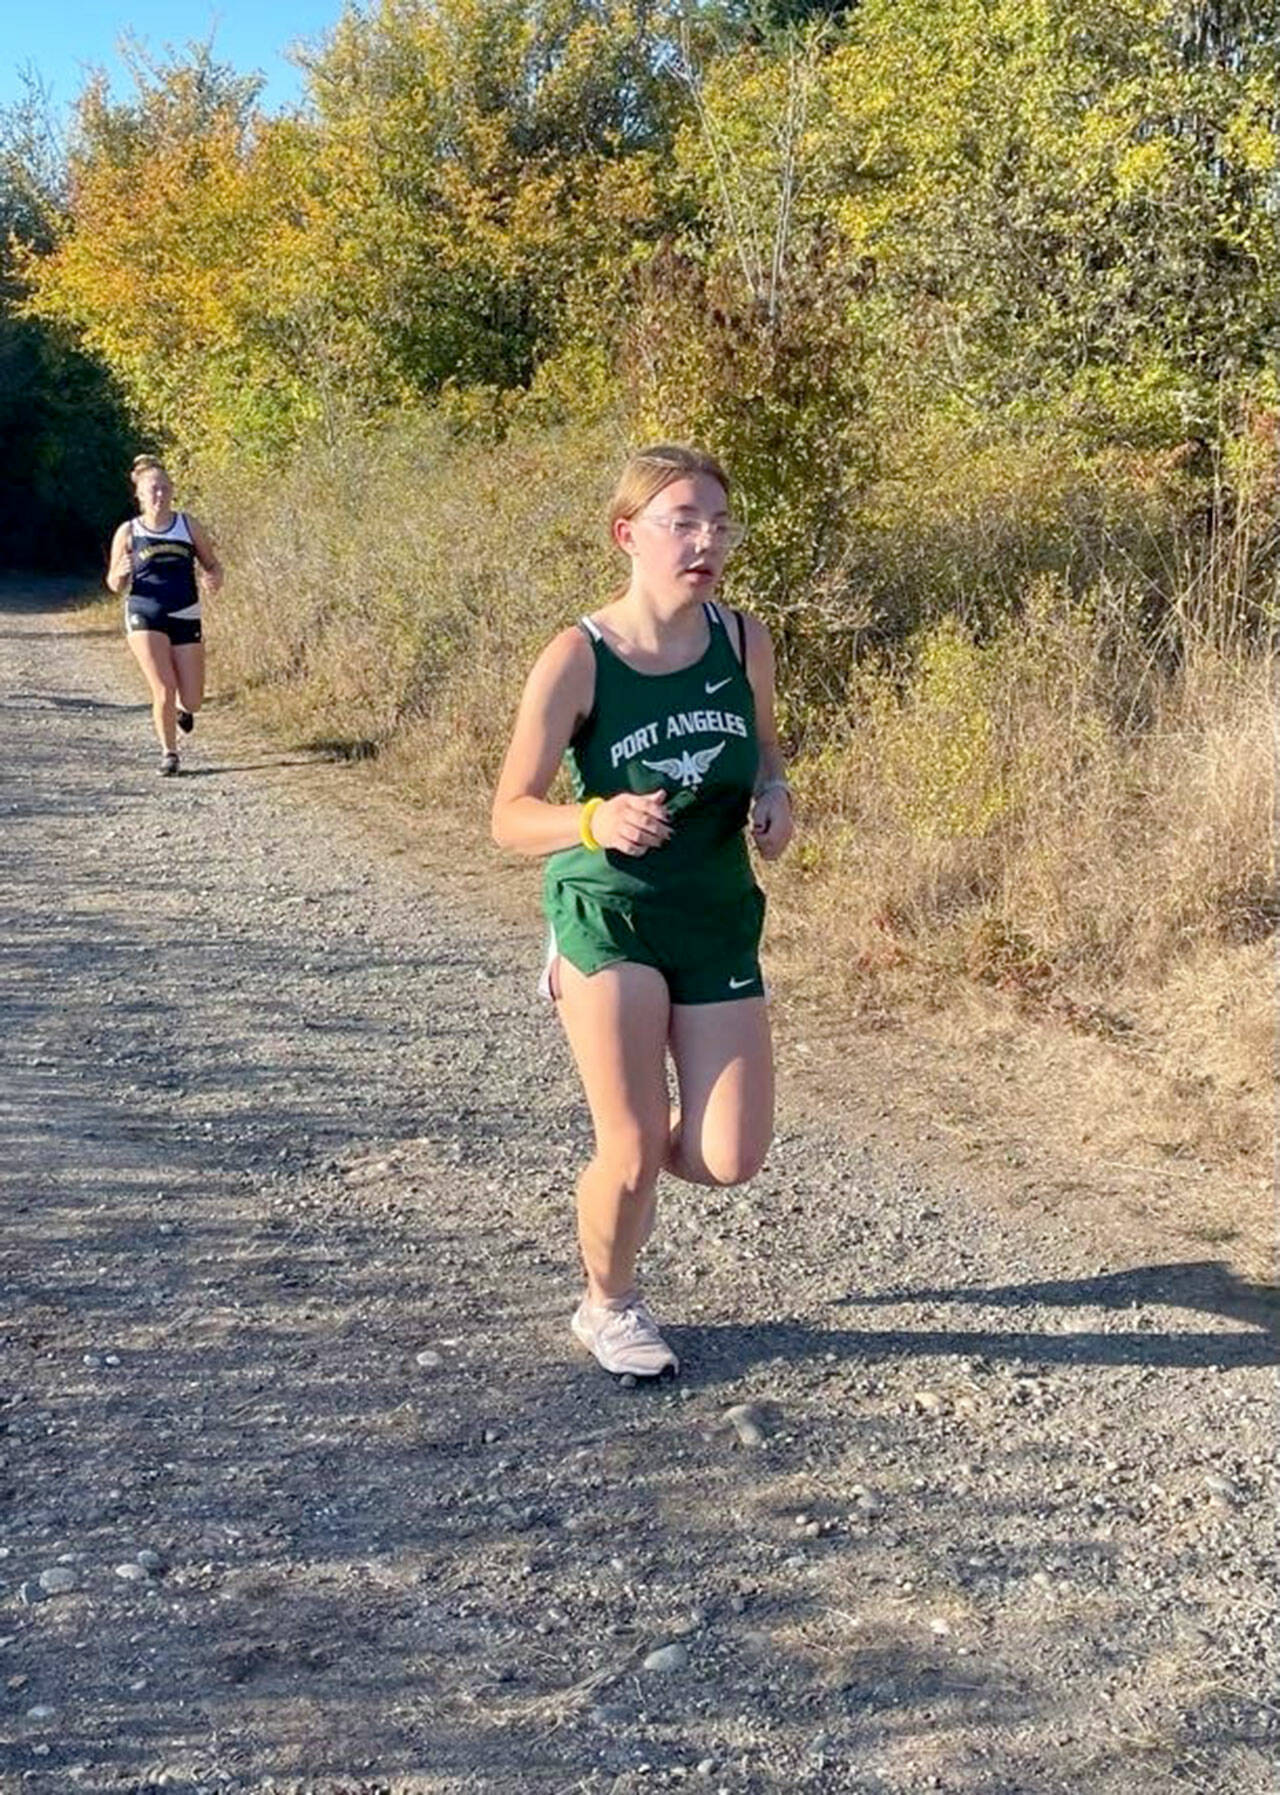 Angie Gooding/Port Angeles Cross Country
Port Angeles' Leka Moniz powers to the finish line during an Olympic League Cross Country meet at Dungeness Recreation Area on Wednesday.